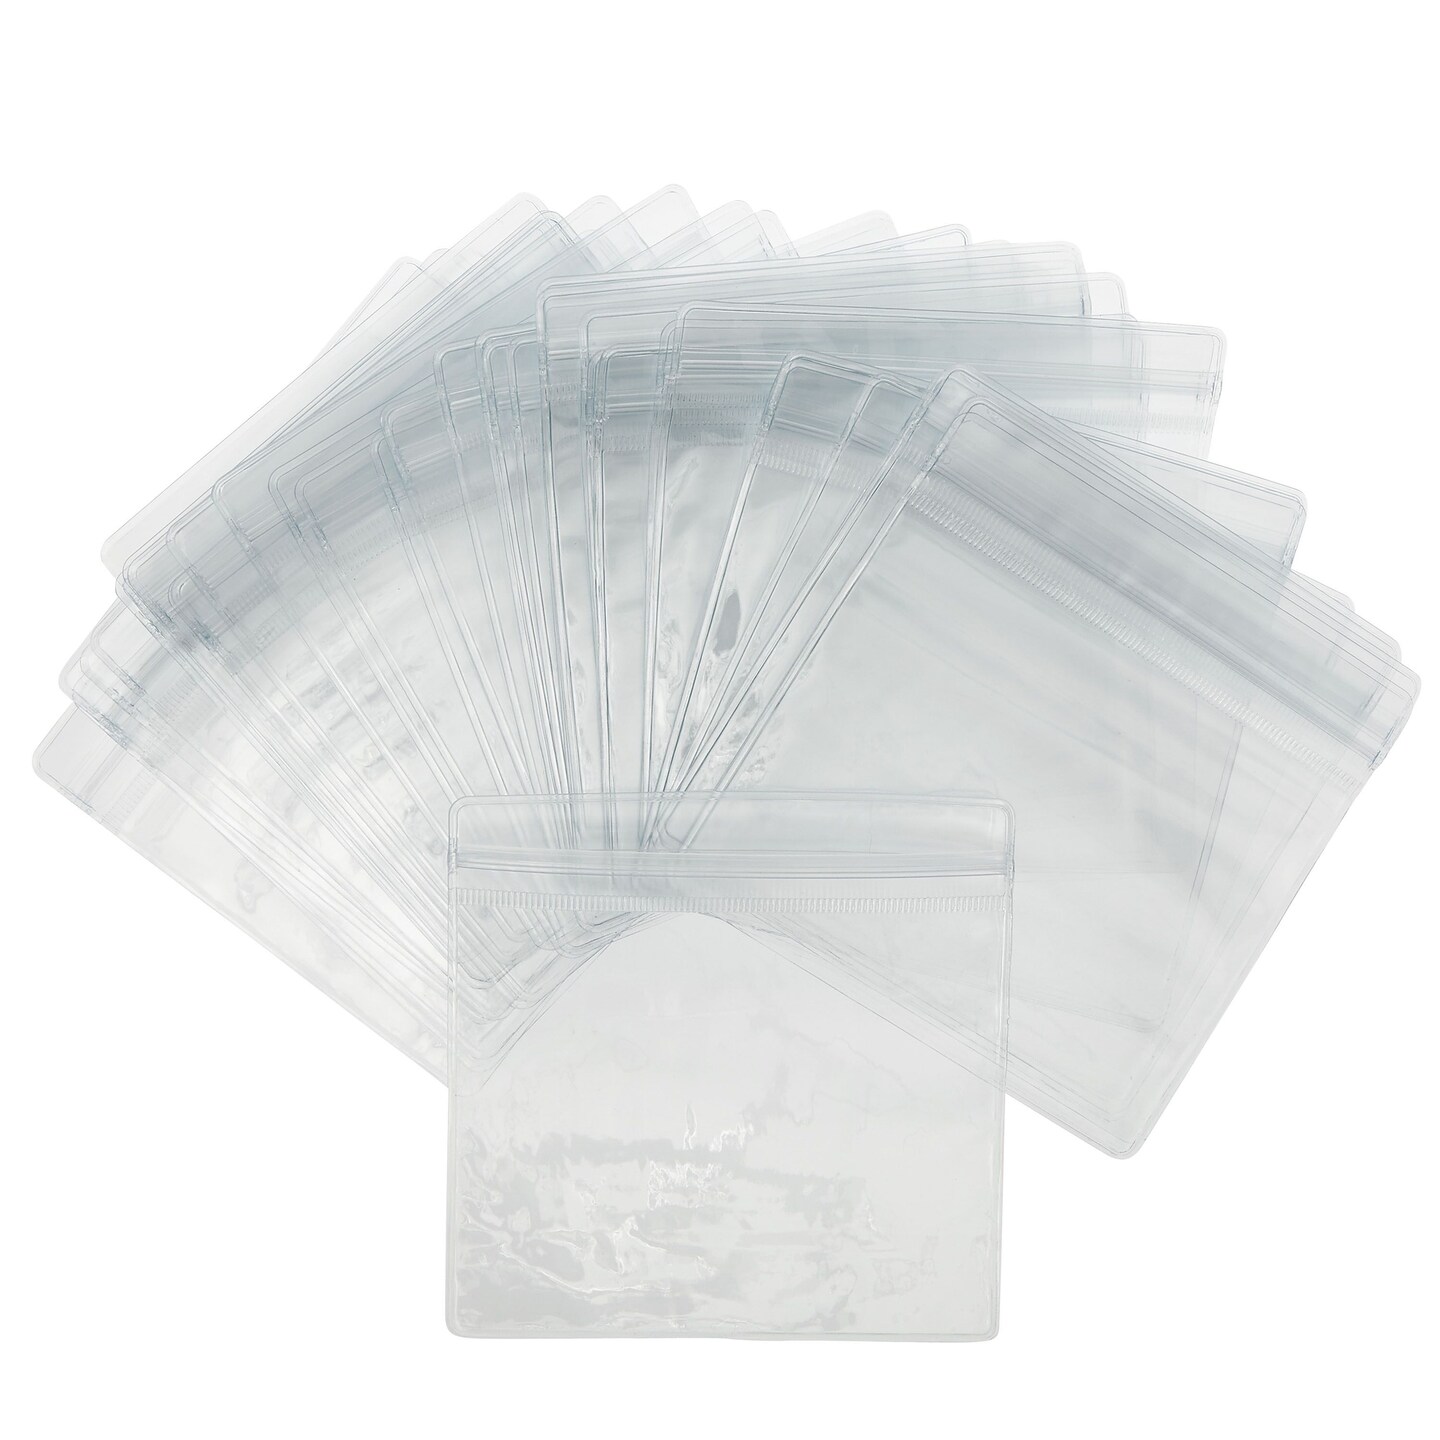 Clear PVC Tote Bag at Rs 20 | Vinyl Bags in Ludhiana | ID: 20847546273